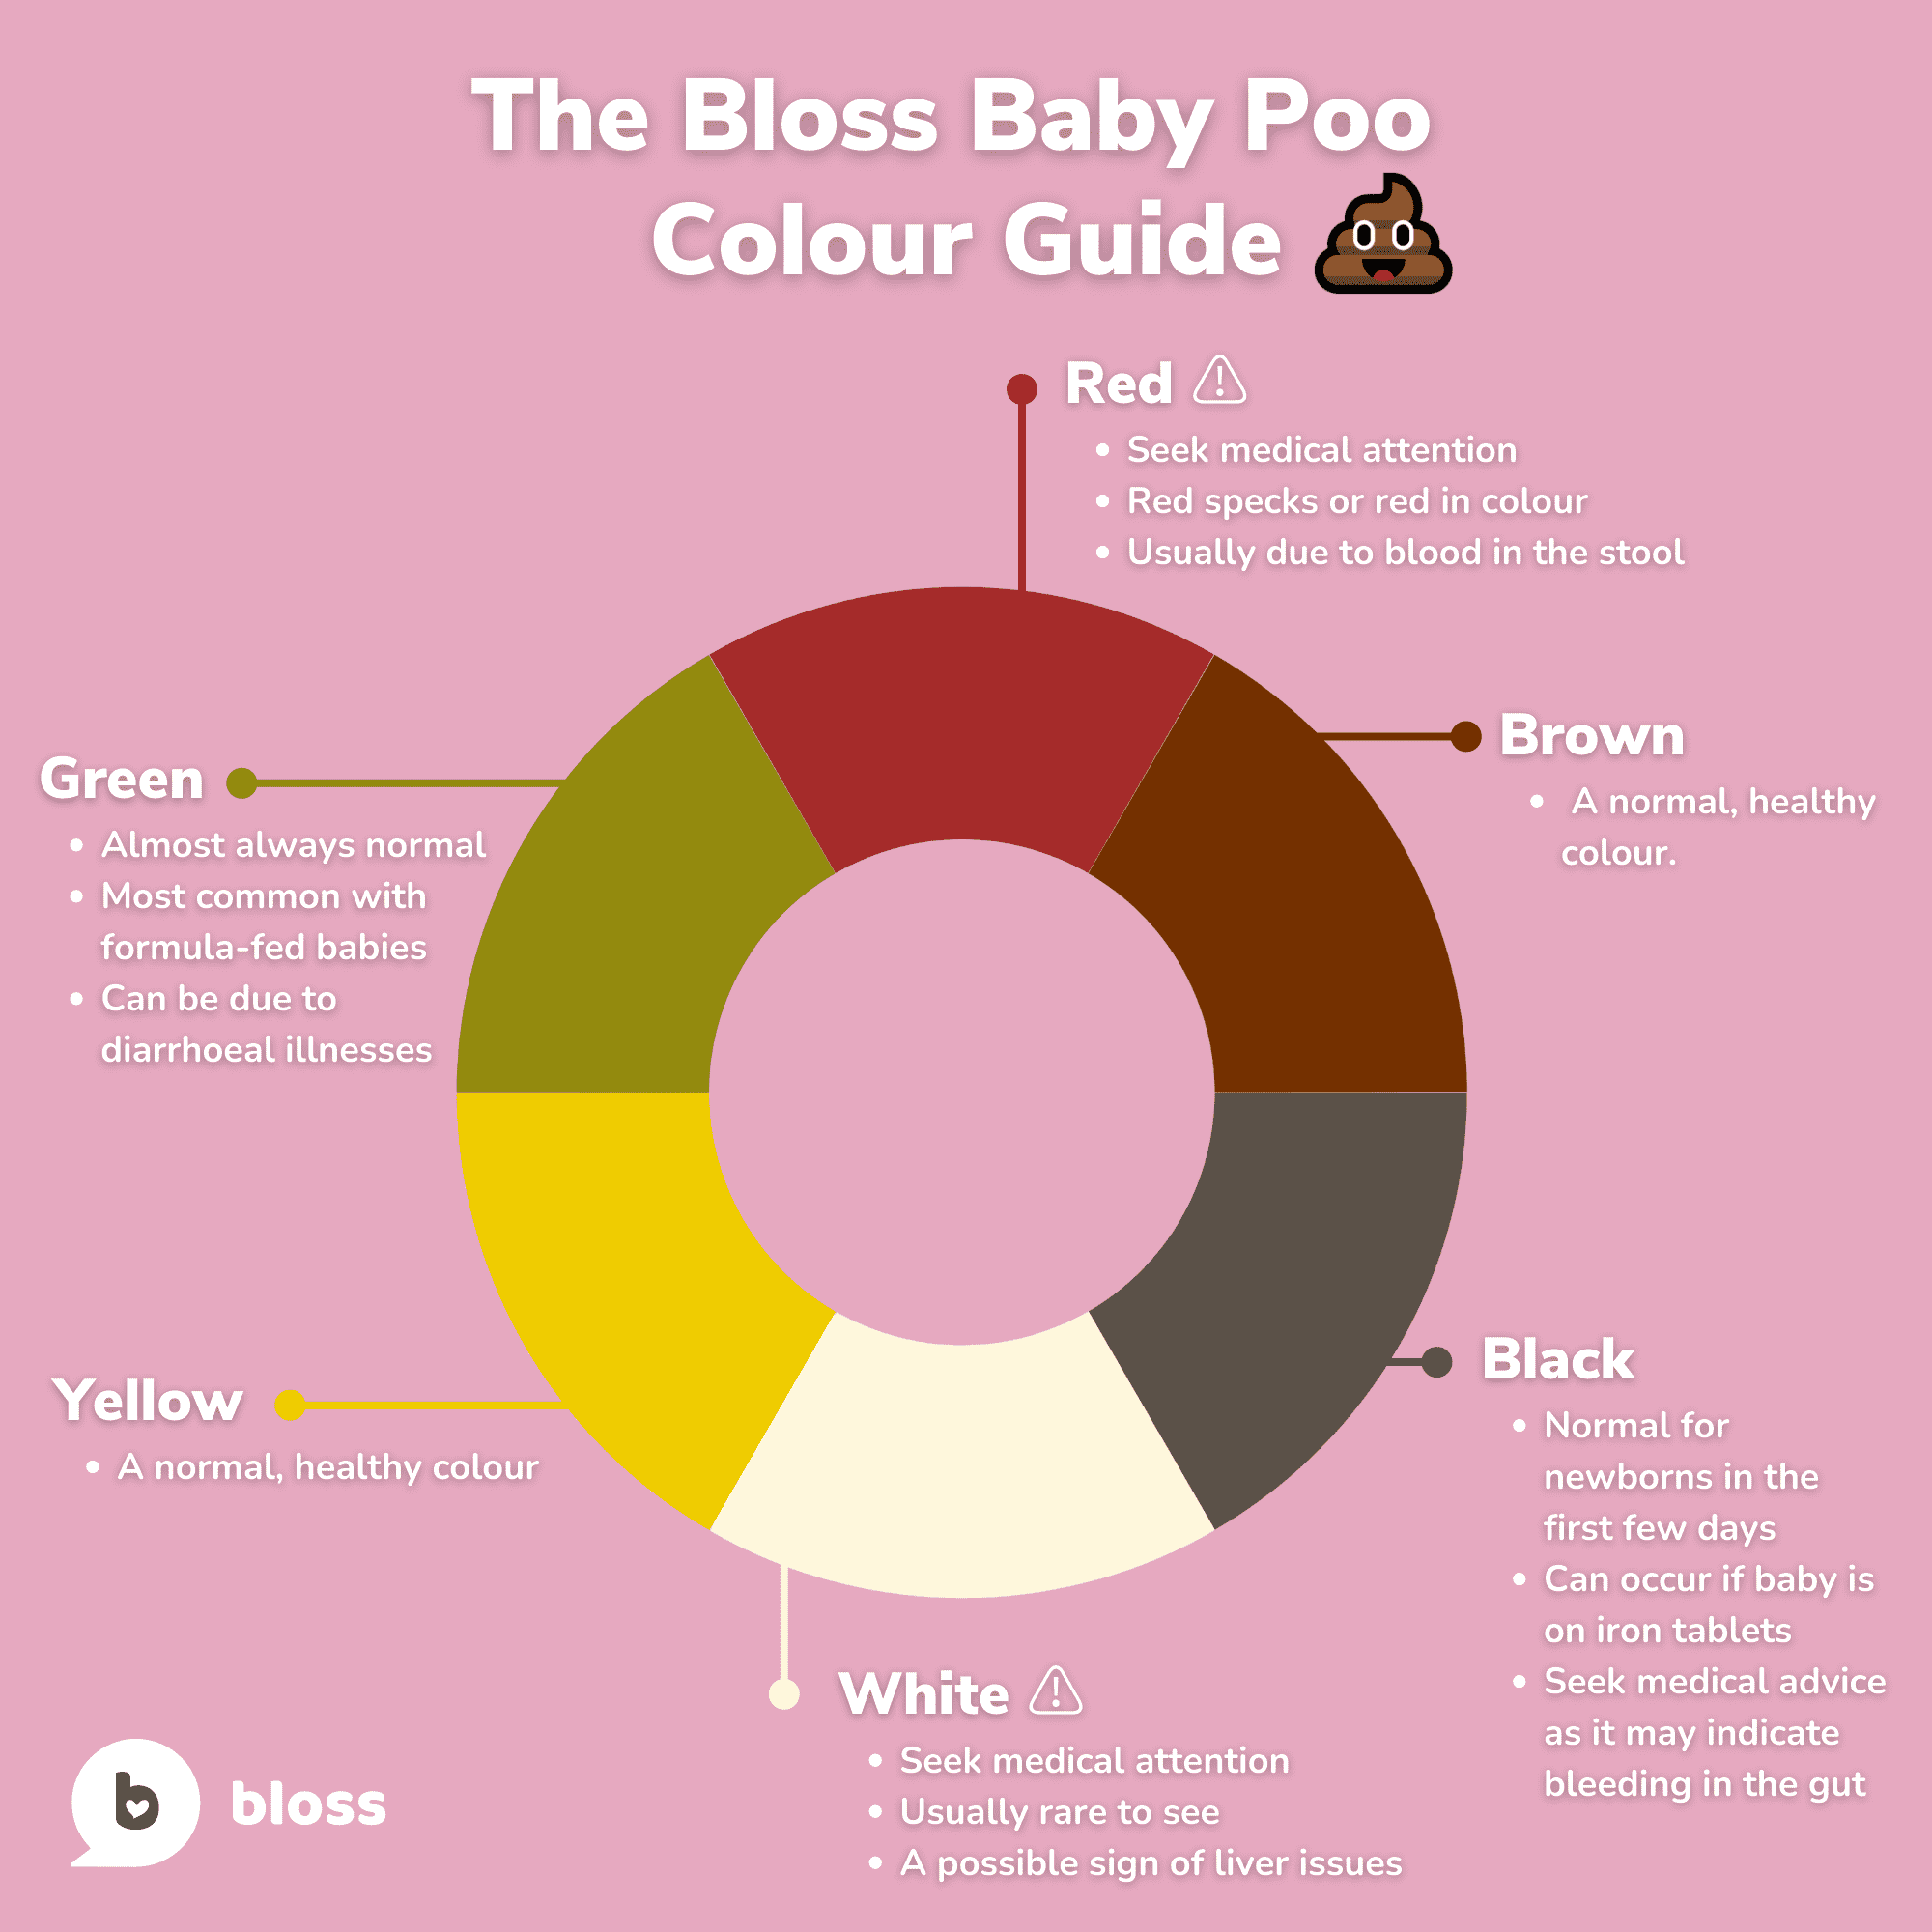 The Bloss Baby Poo Colour Guide